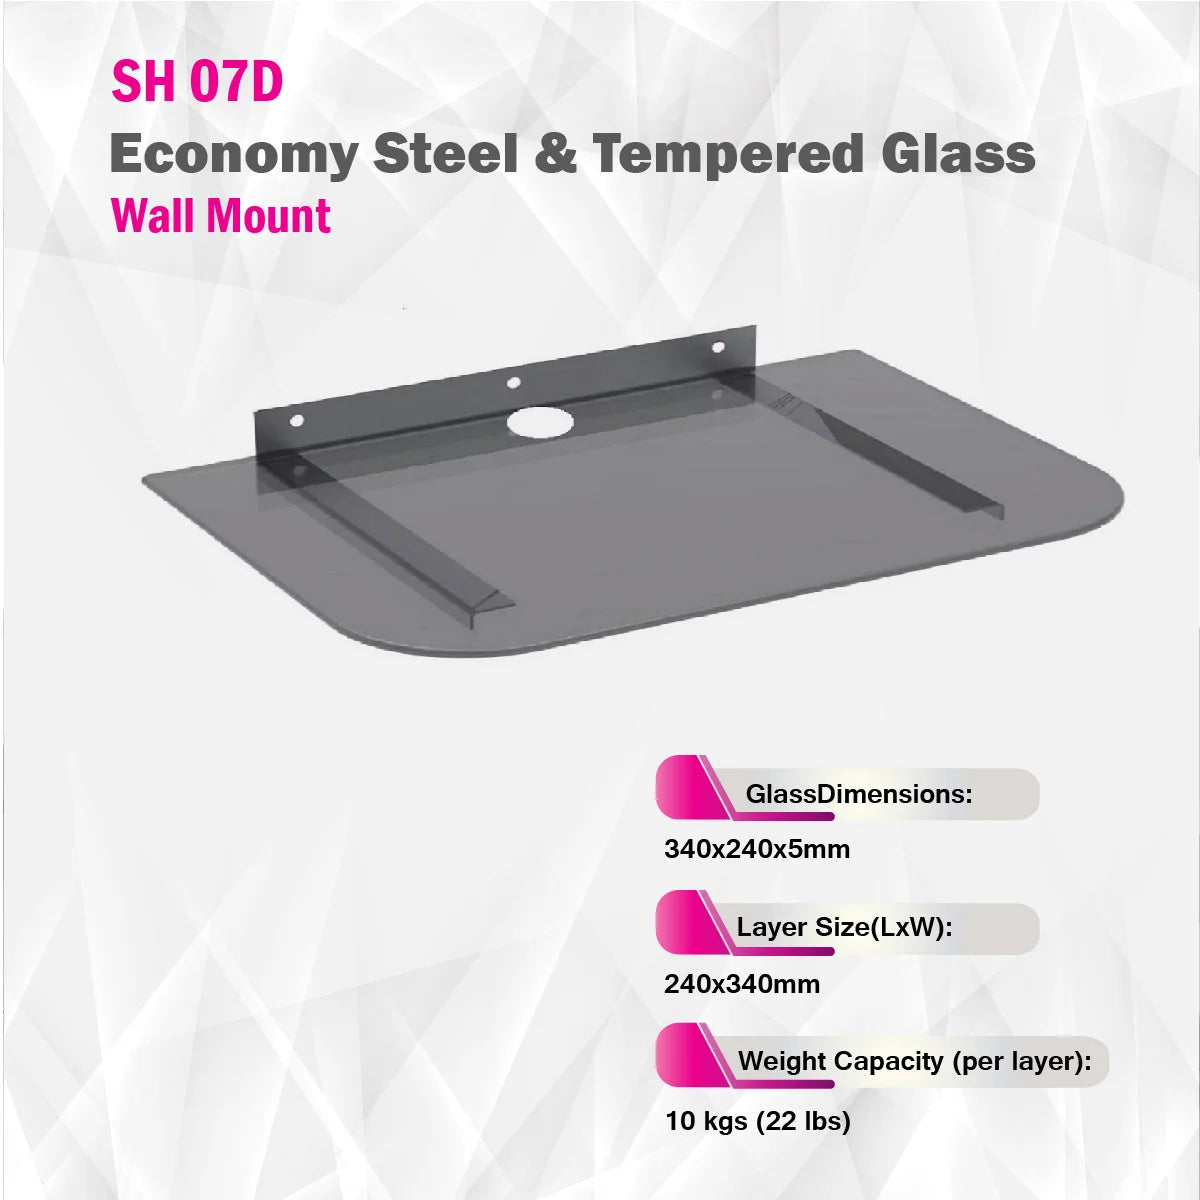 Skill Tech SH 07D - Economy Steel & Tempered Glass Wall Mount